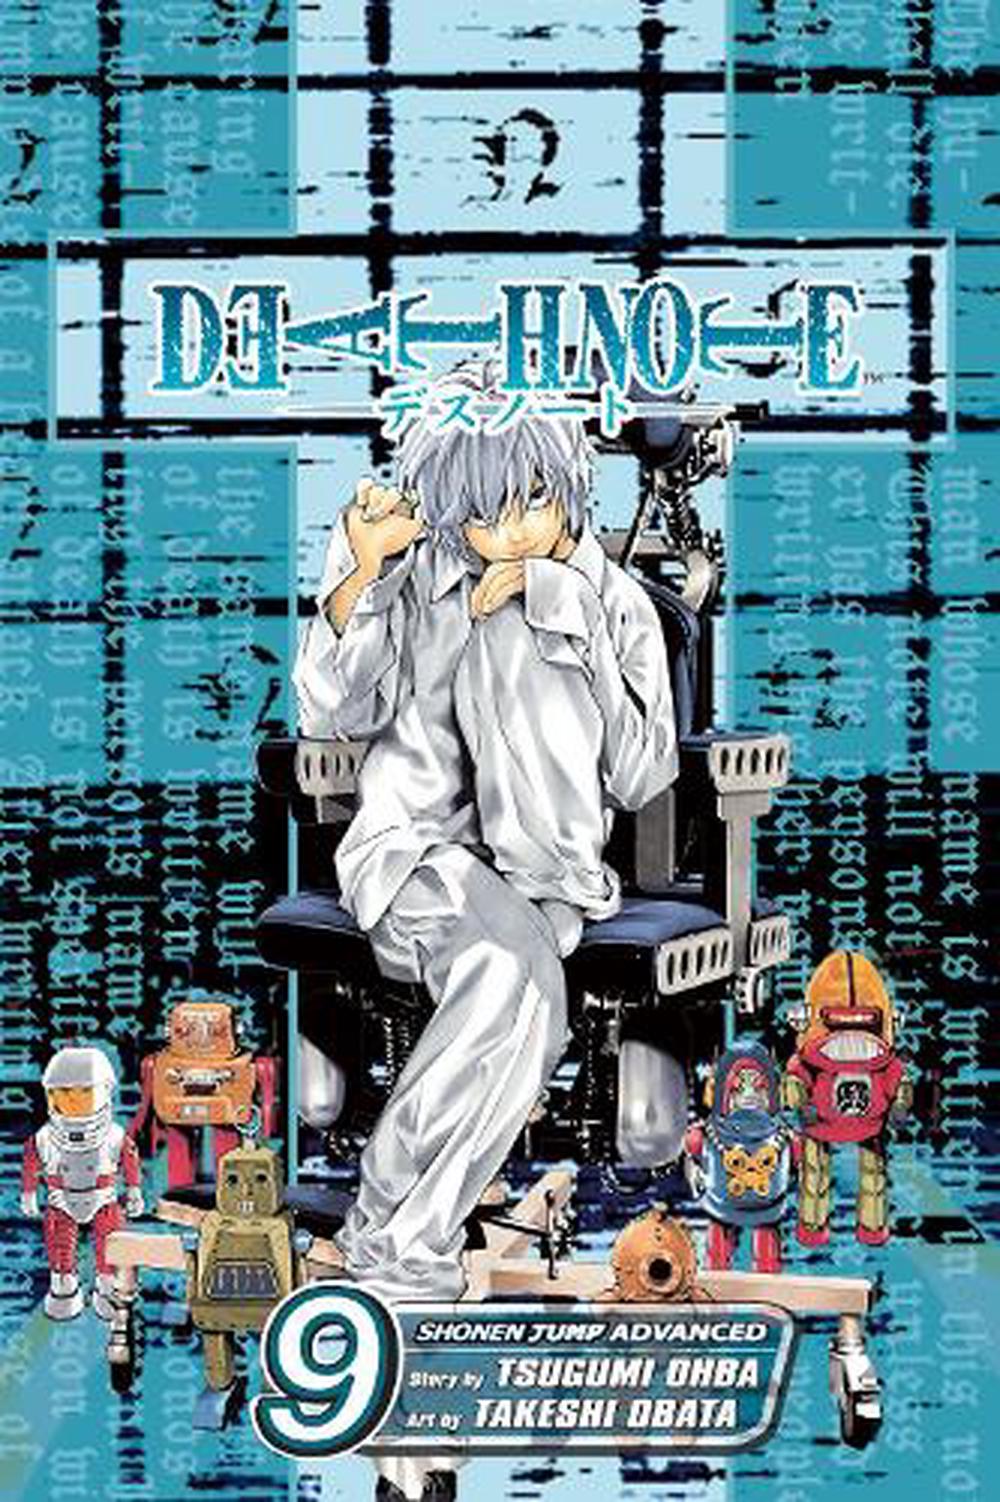 Death Note, Vol. 9 by Tsugumi Ohba, Paperback, 9781421506302 | Buy online  at The Nile